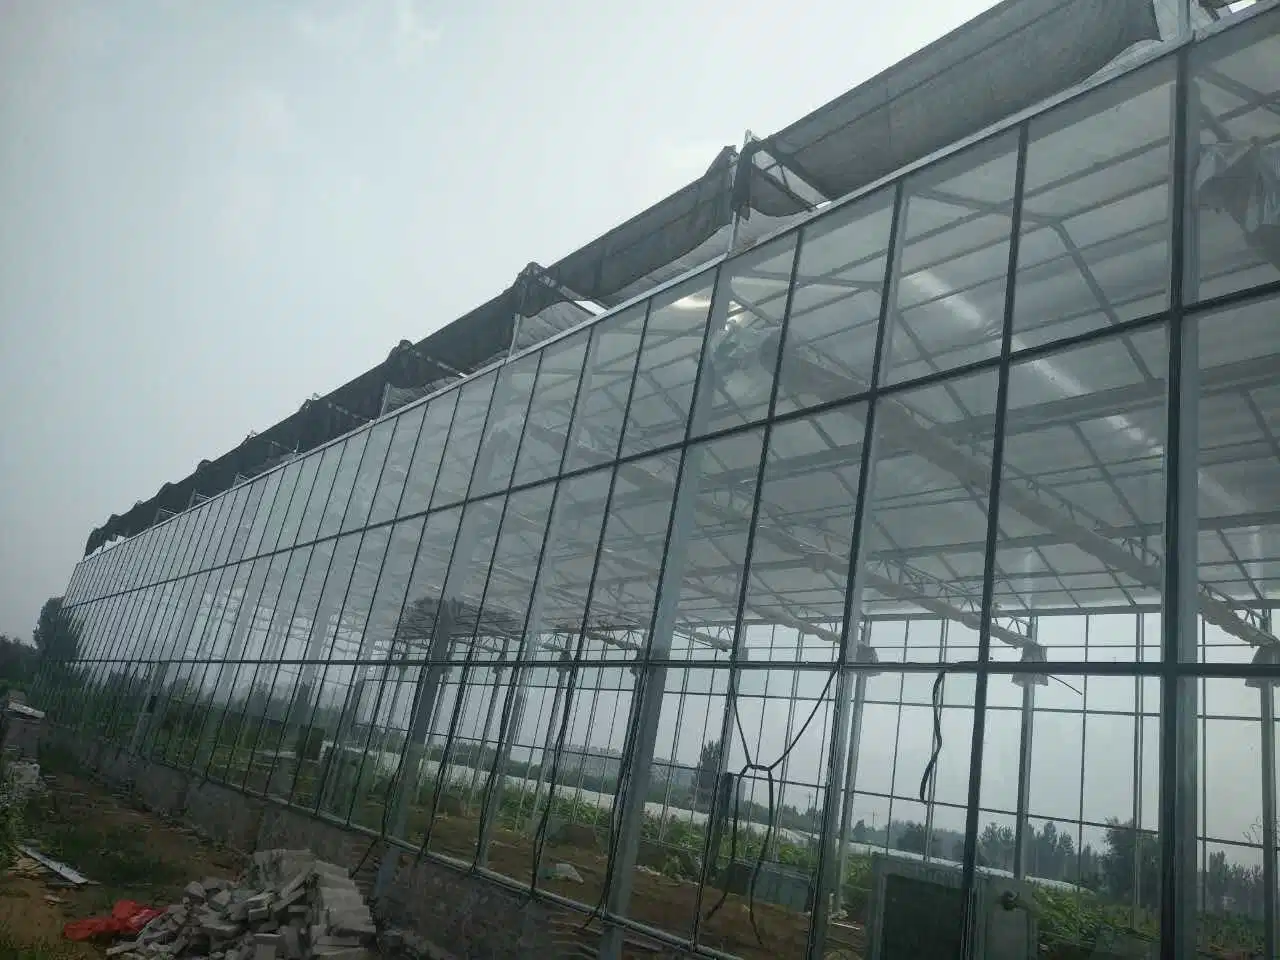 Smart Multi-Span Tunnel/Arch Type PE/Po Film Glass Agriculture/ Commercial Ecogical Greenhouse for Tomato/Cucumber/Strawberry with Hydroponics Growing System